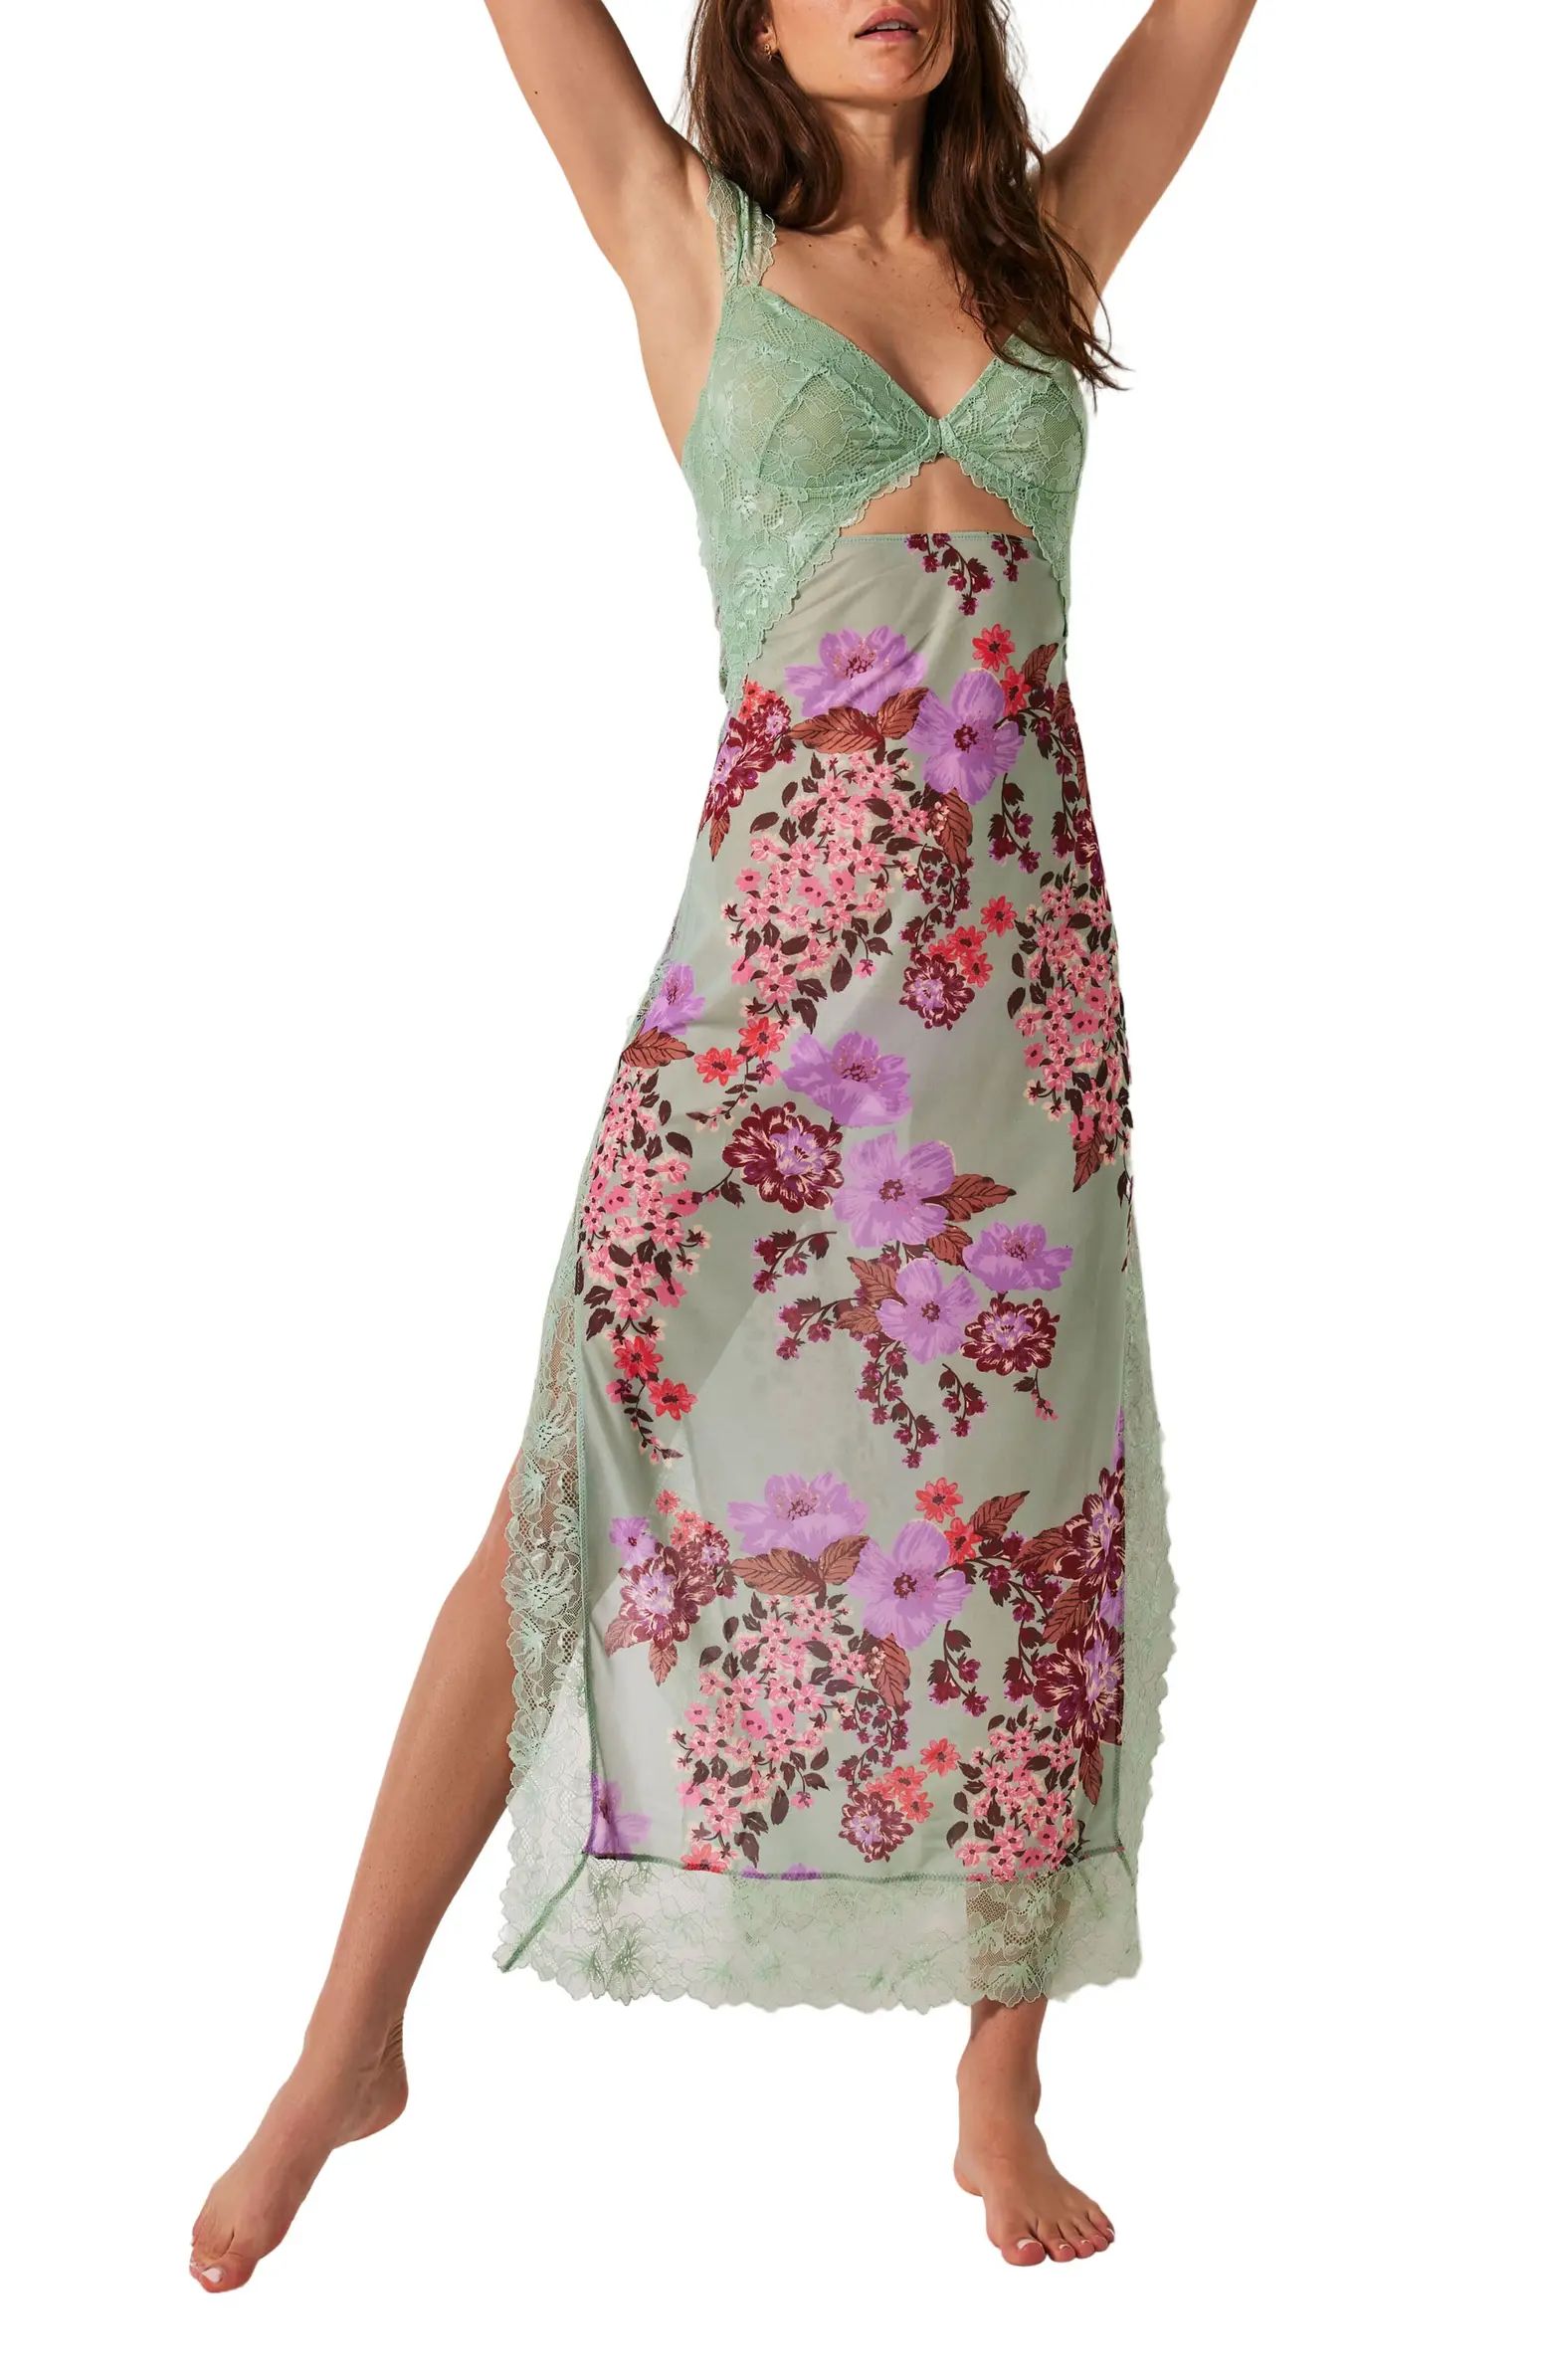 Suddenly Fine Floral Print Cutout Lace Trim Nightgown | Nordstrom